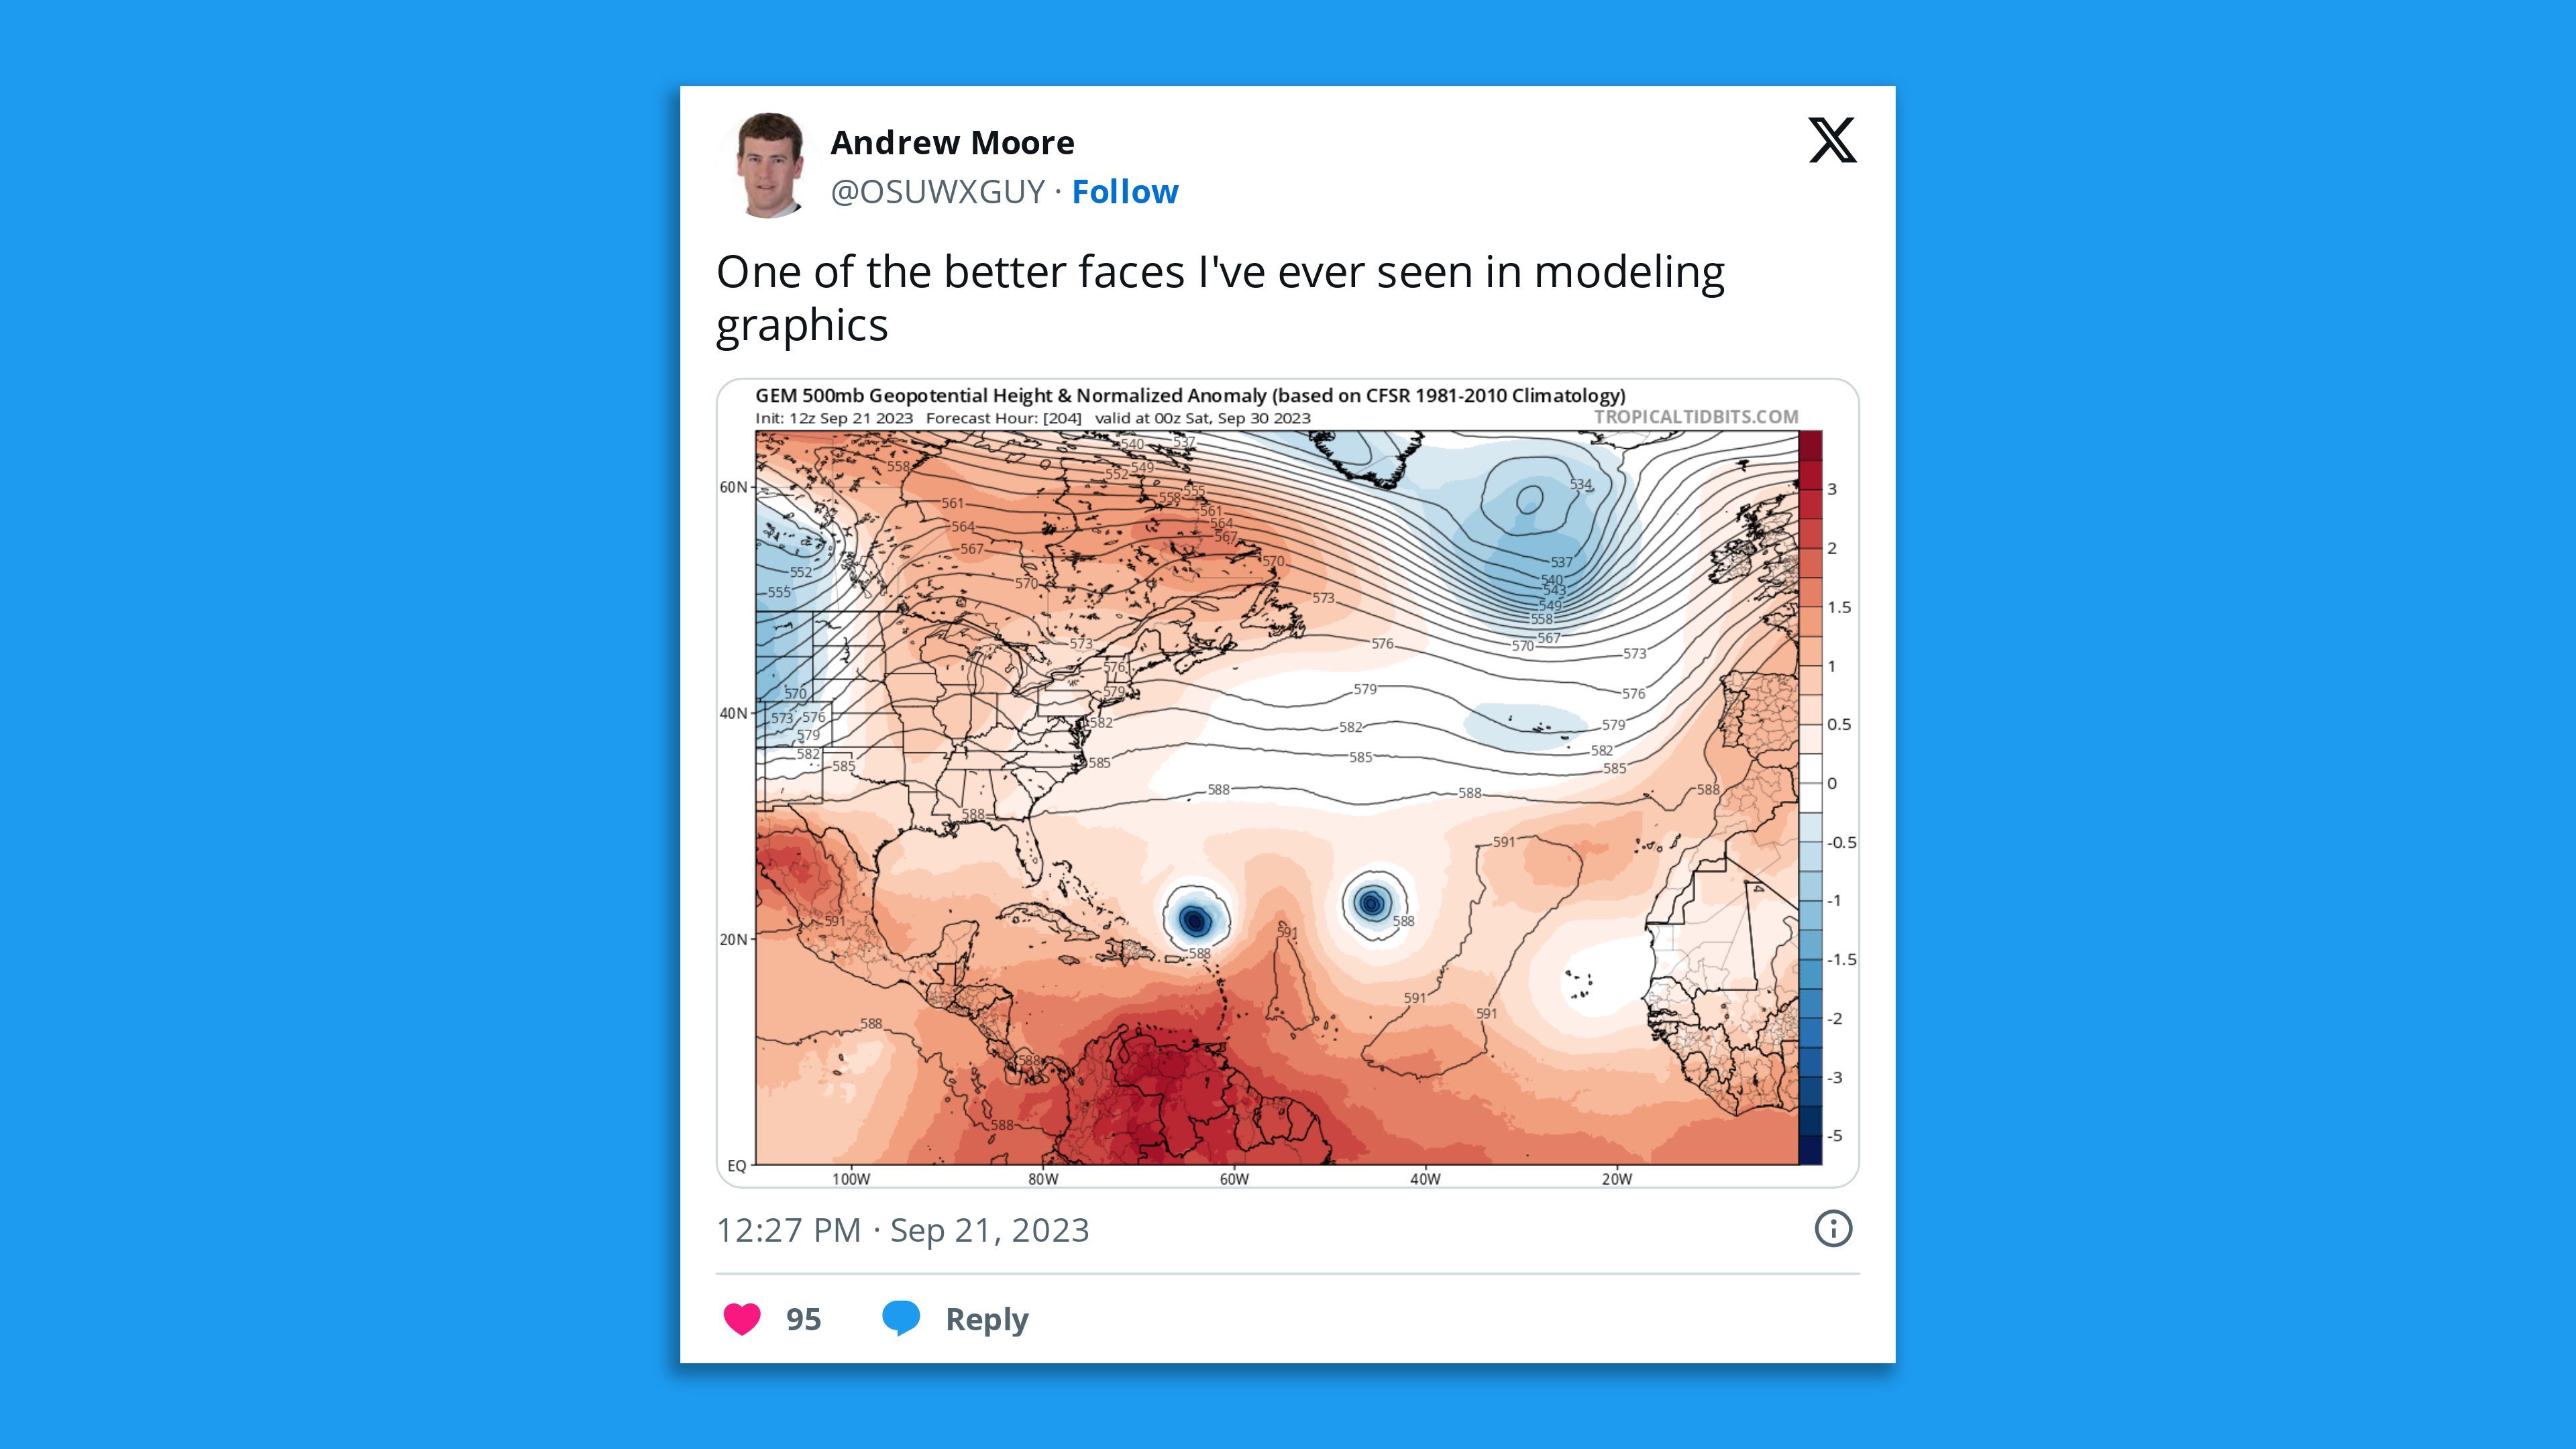 Computer model image showing the outline of a face in the tropical Atlantic Ocean.